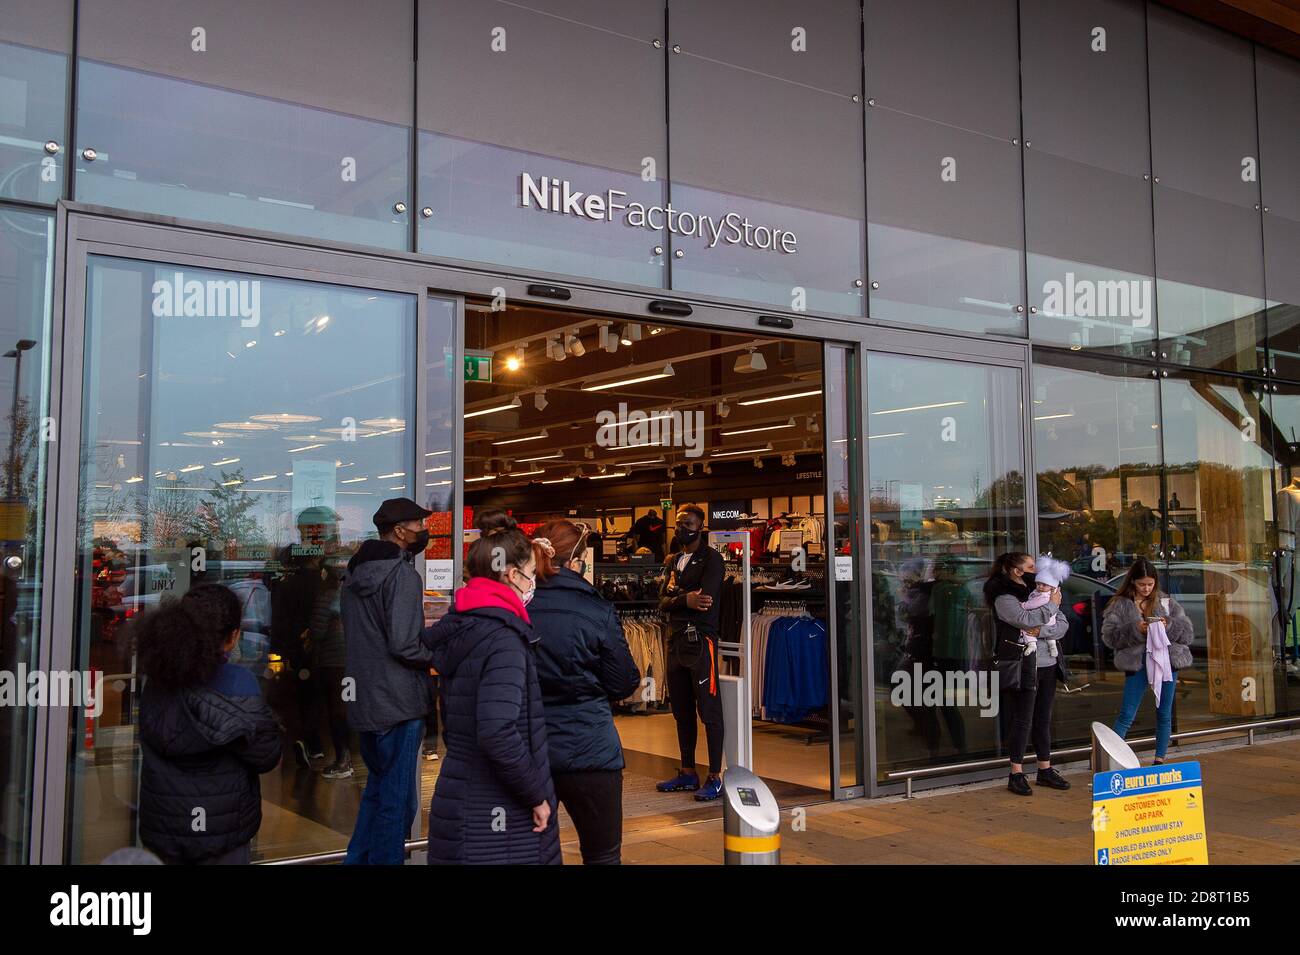 Ru humedad sextante Taplow, Buckinghamshire, UK. 1st November, 2020. Shoppers queue to enter  the Nike Factory Shop. The car park at the Bishop Centre Retail Park in  Taplow, Buckinghamshire this morning was full. Shoppers were